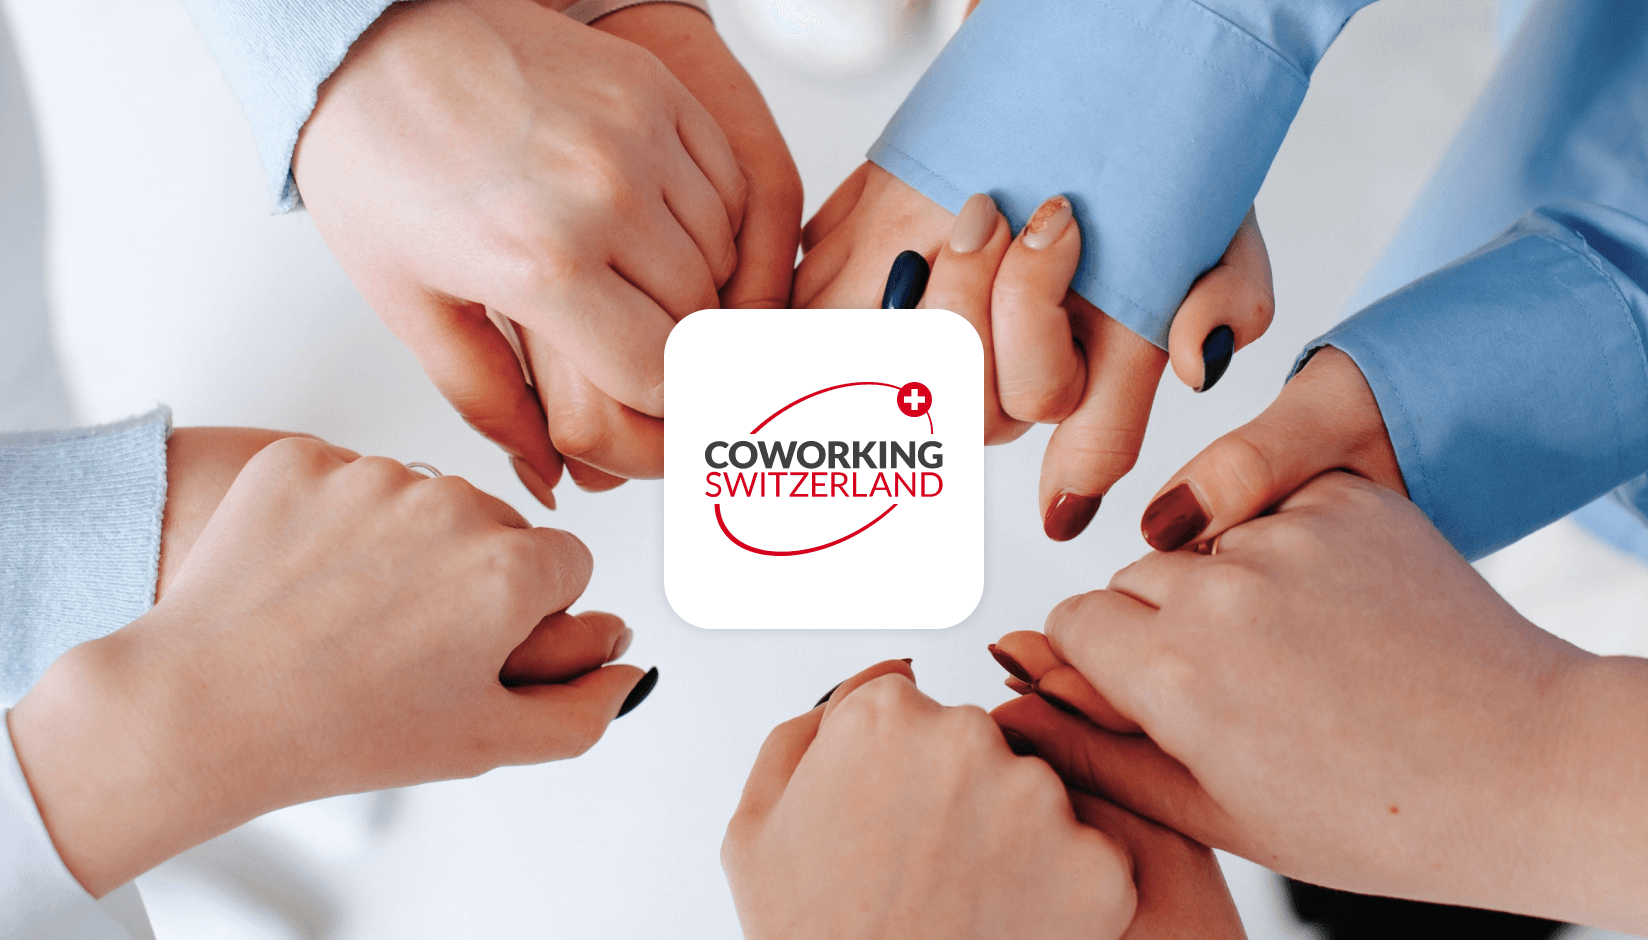 andcards: New Patron of Coworking Switzerland